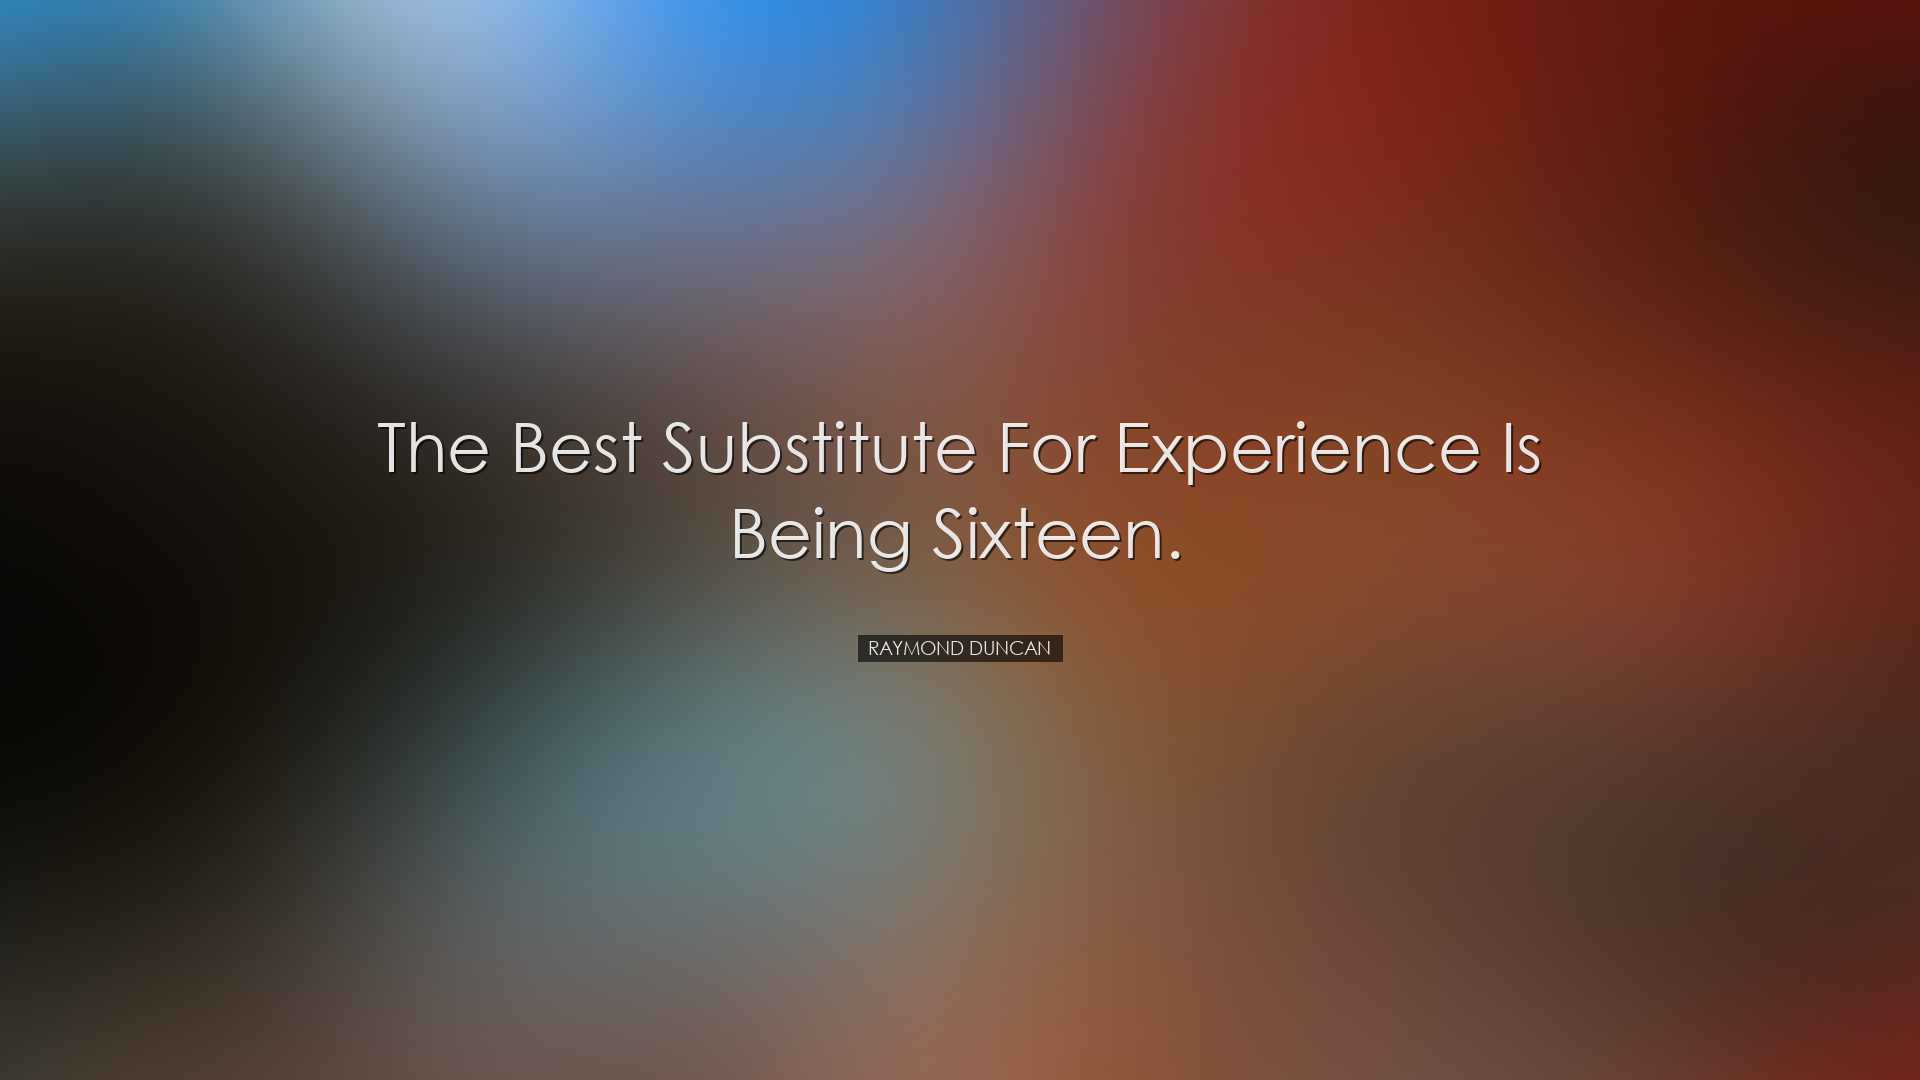 The best substitute for experience is being sixteen. - Raymond Dun